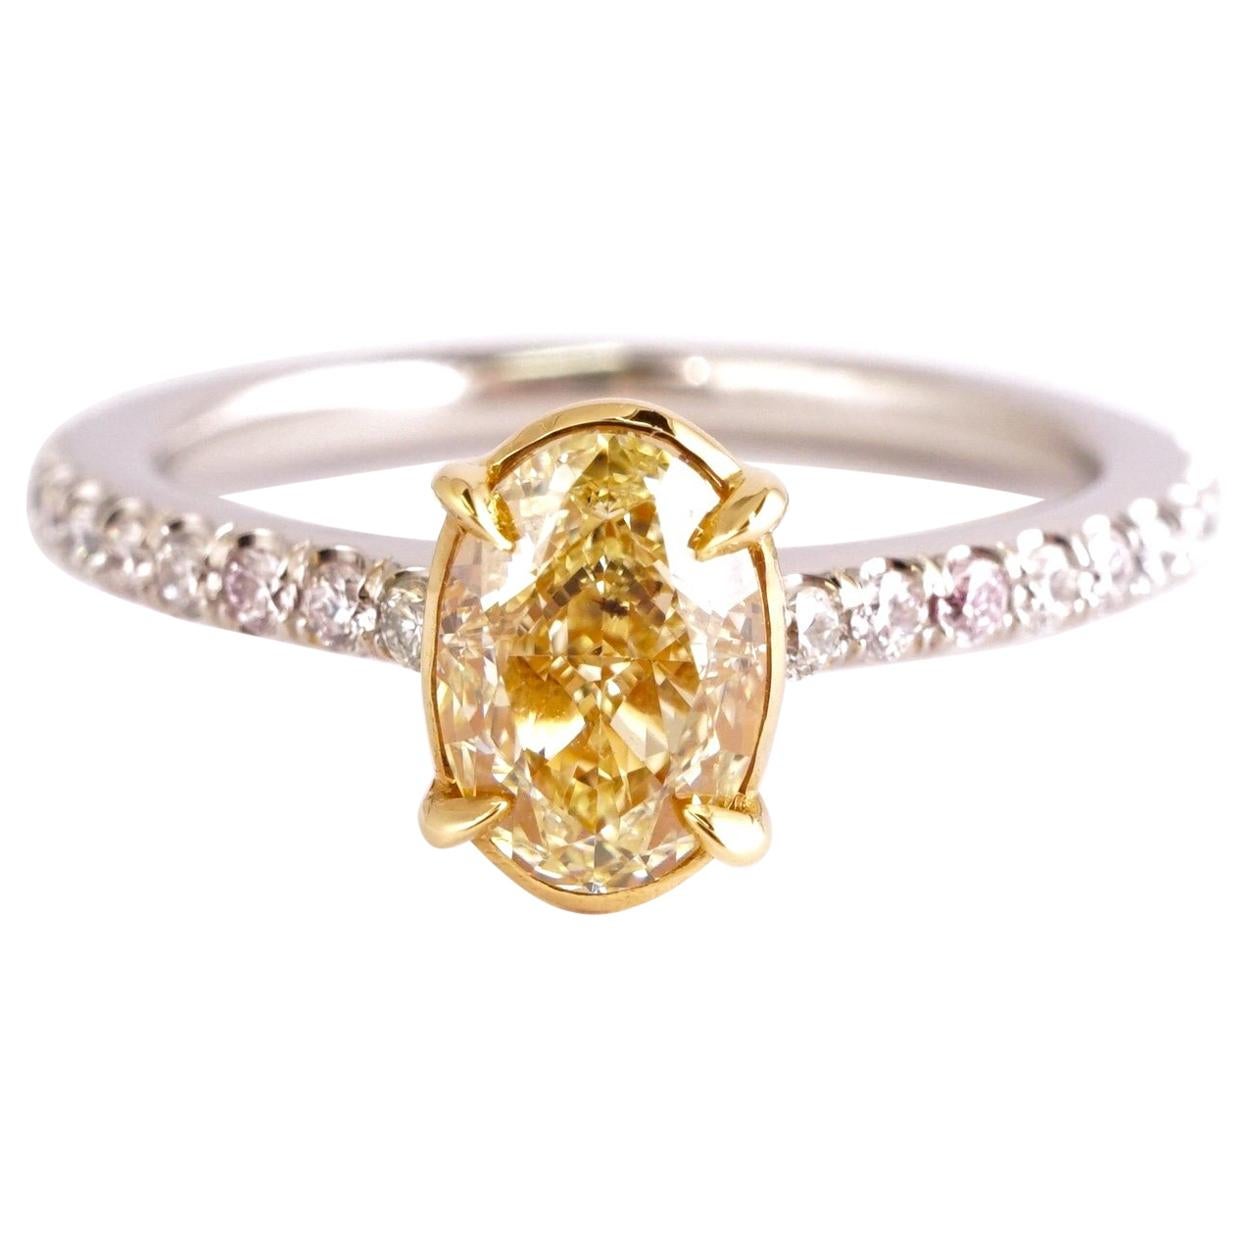 Certified 1.04 Carat Fancy Yellow Oval Cut Engagement Ring in Platinum